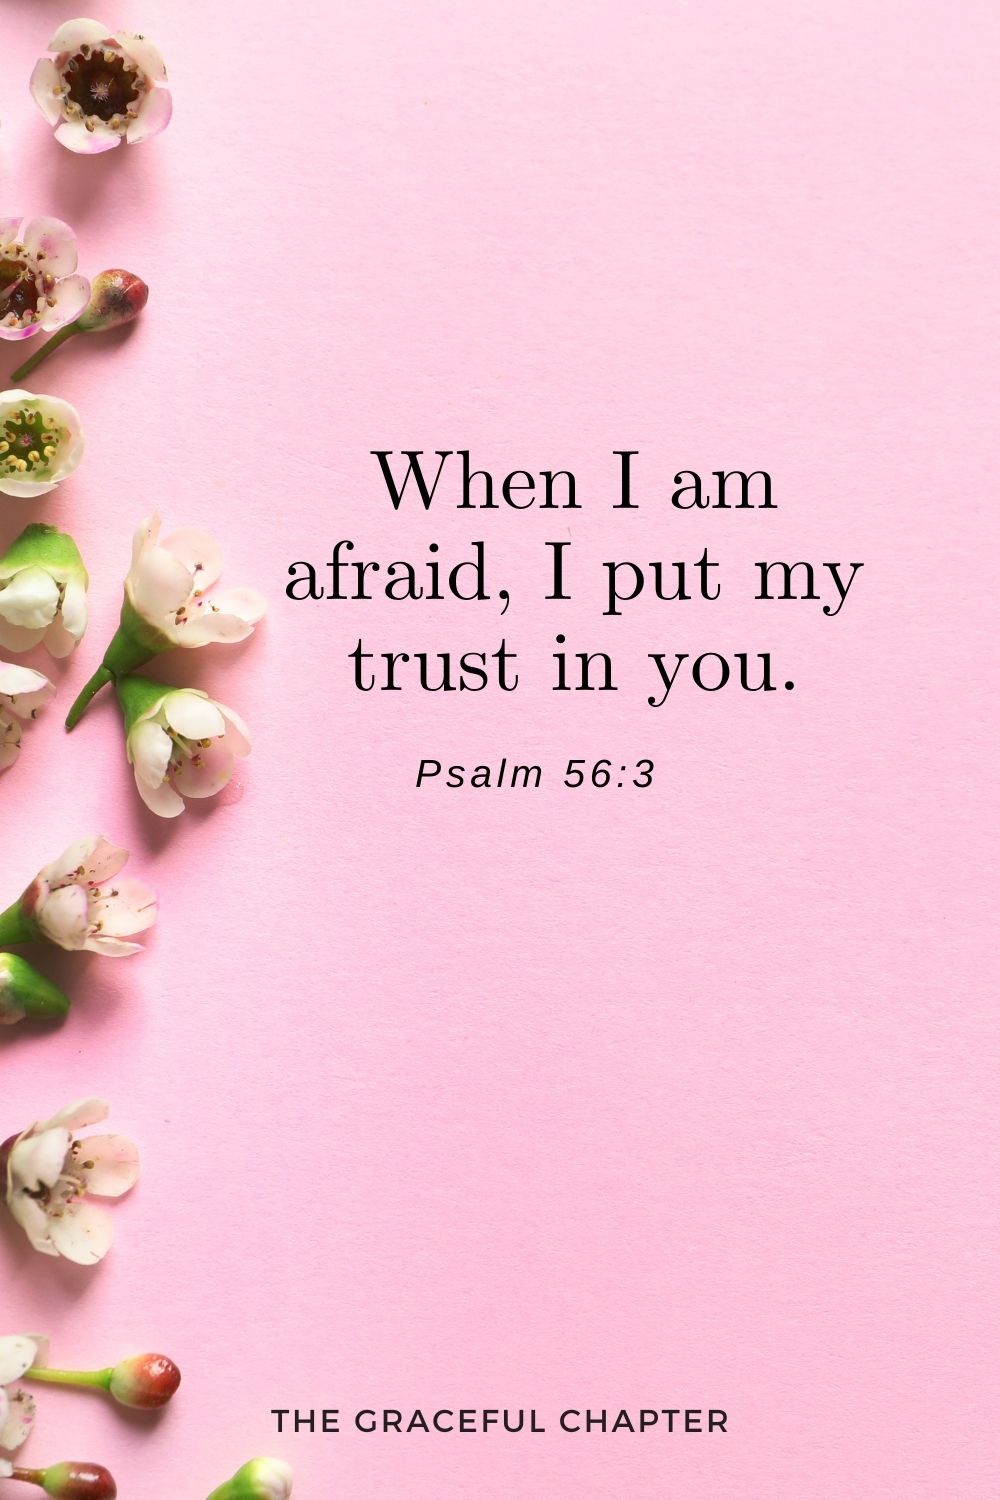 short bible verses about faith - When I am afraid, I put my trust in you. Psalm 56:3